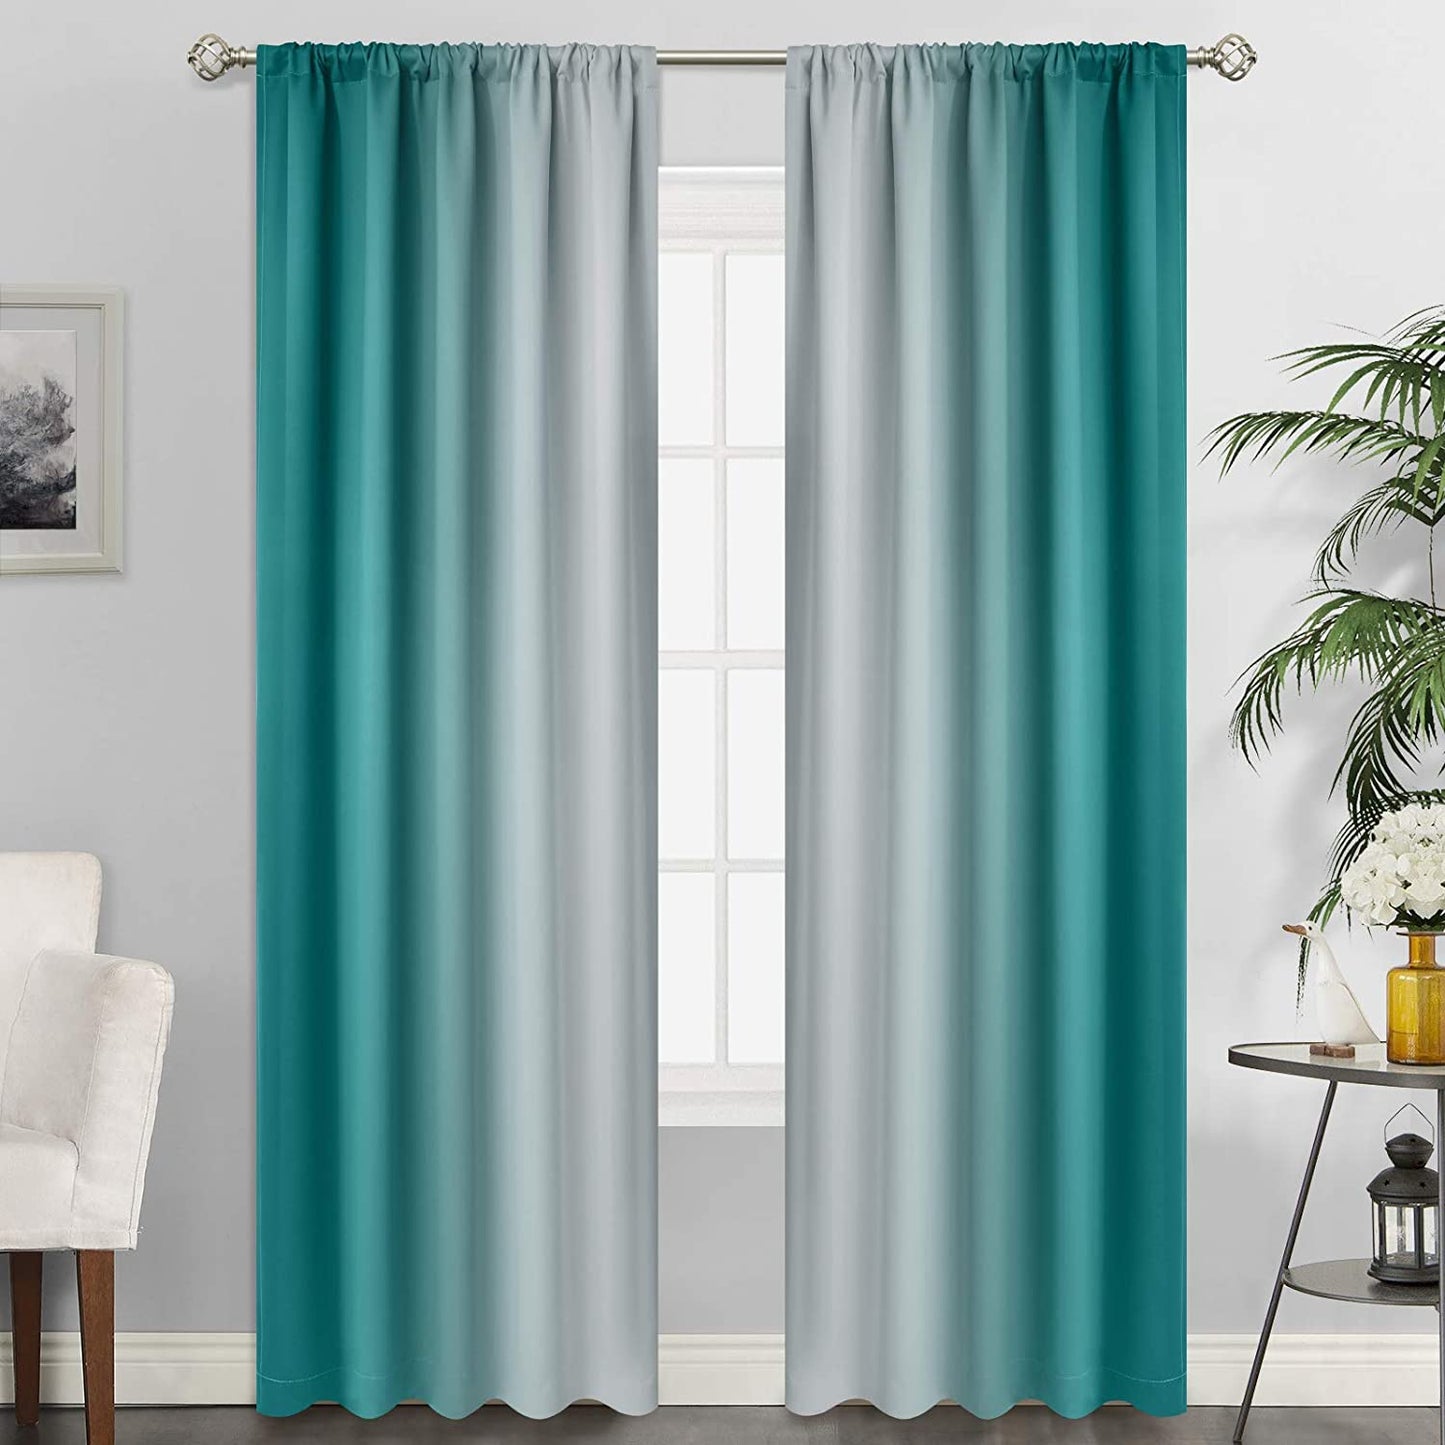 Simplehome Ombre Room Darkening Curtains for Bedroom, Light Blocking Gradient Purple to Greyish White Thermal Insulated Rod Pocket Window Curtains Drapes for Living Room,2 Panels, 52X84 Inches Length  SimpleHome Teal 52W X 84L / 2 Panels 